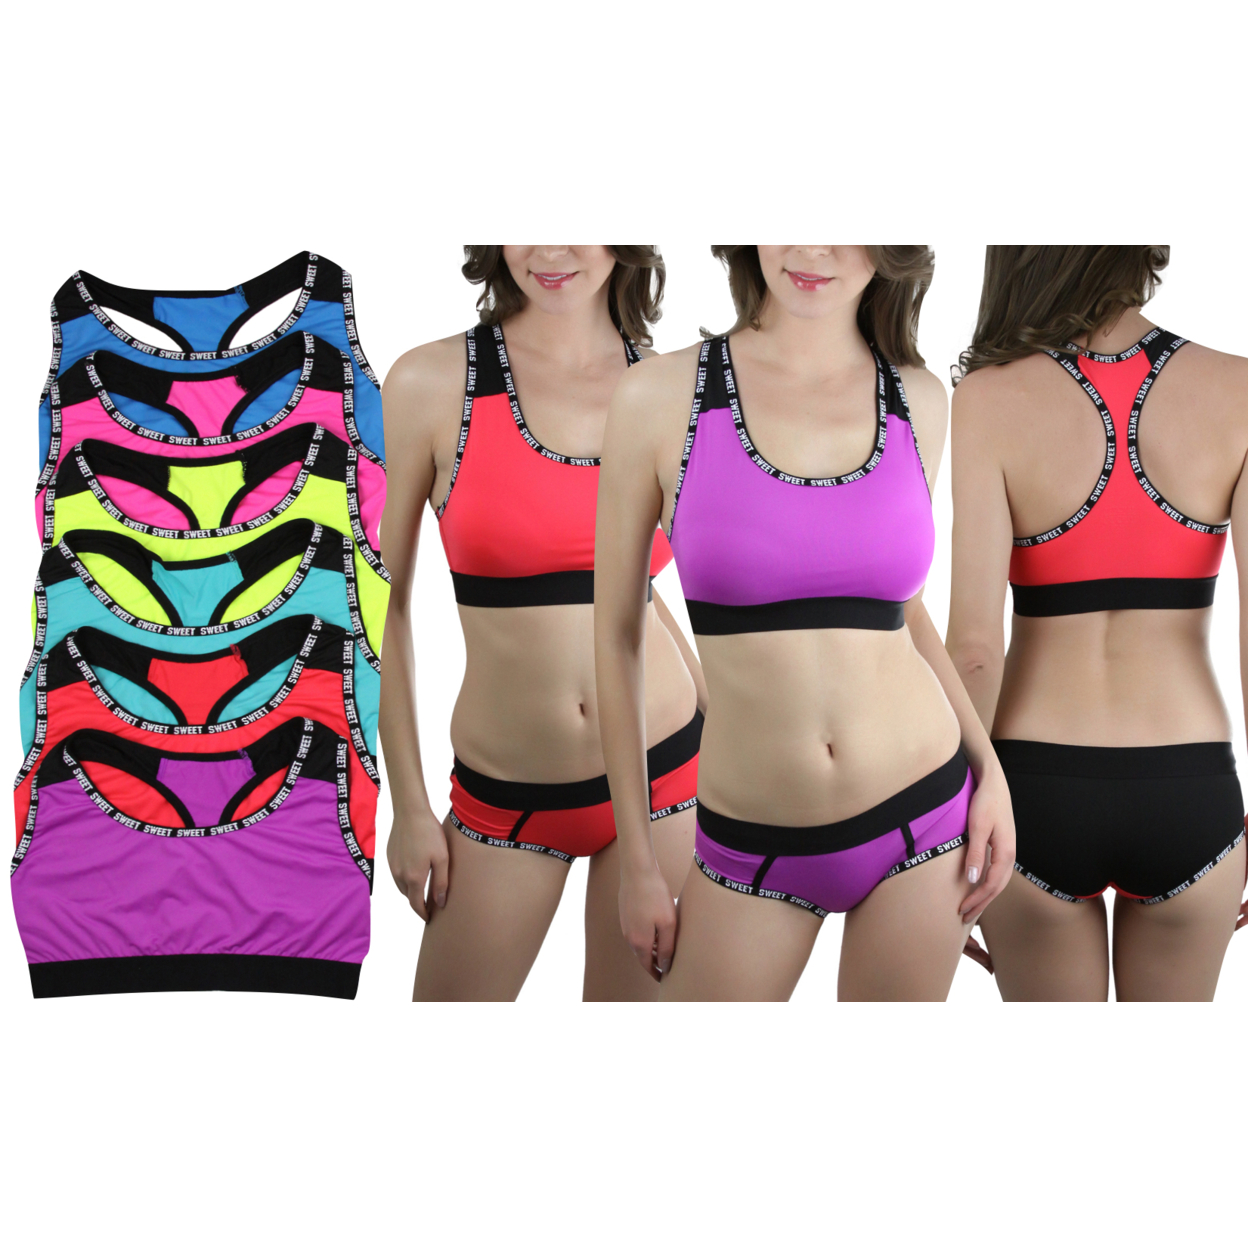 5-Pack Of Women's Sports Bras Or 6-Pack Of Athletic Briefs With Sweet Outer Trim - L/XL, Bras